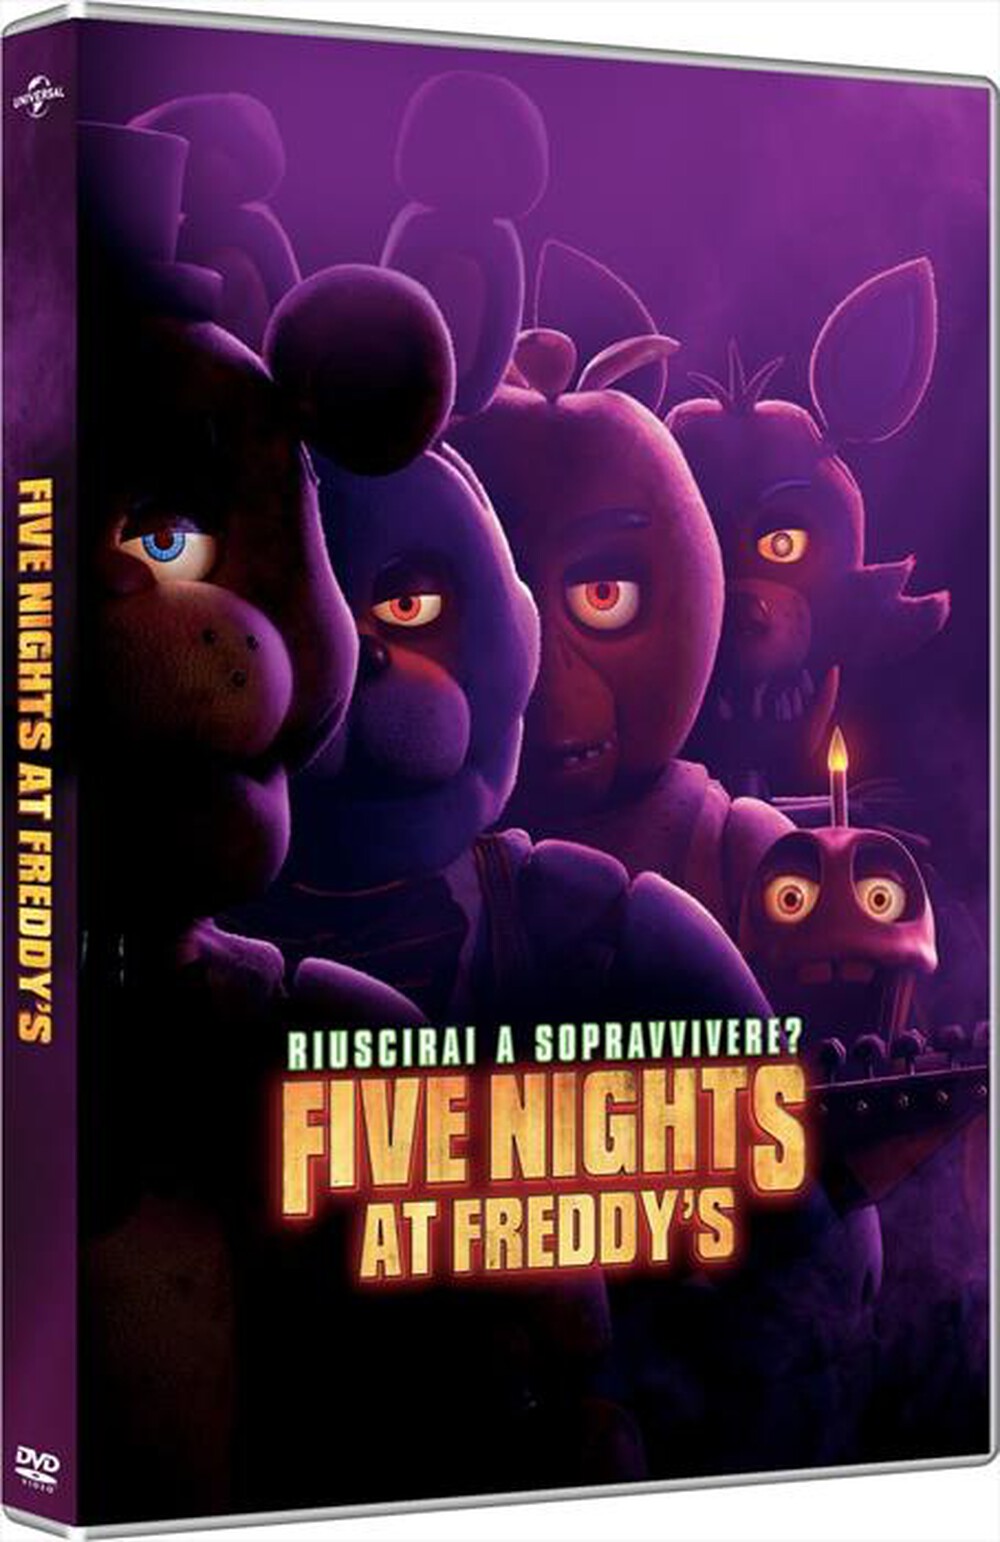 "UNIVERSAL PICTURES - Five Nights At Freddy'S"